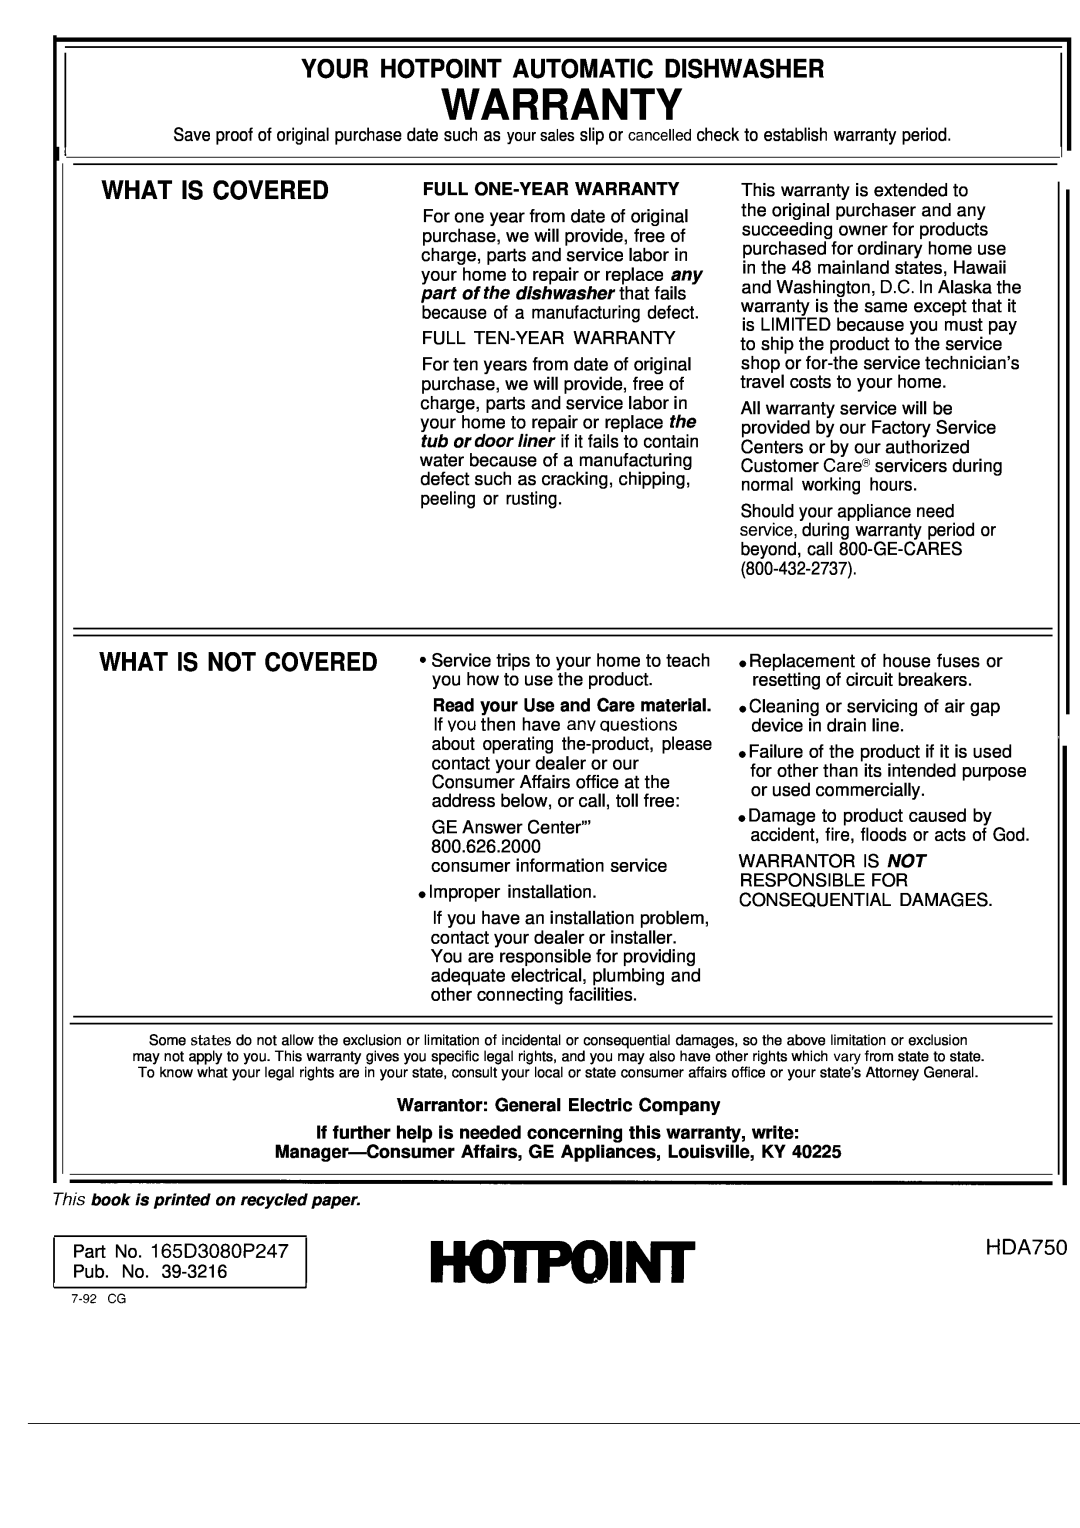 Hotpoint HDA750 Your Hotpoint Automatic Dishwasher, What Is Covered, Warranty, Full One-Yearwarranty 